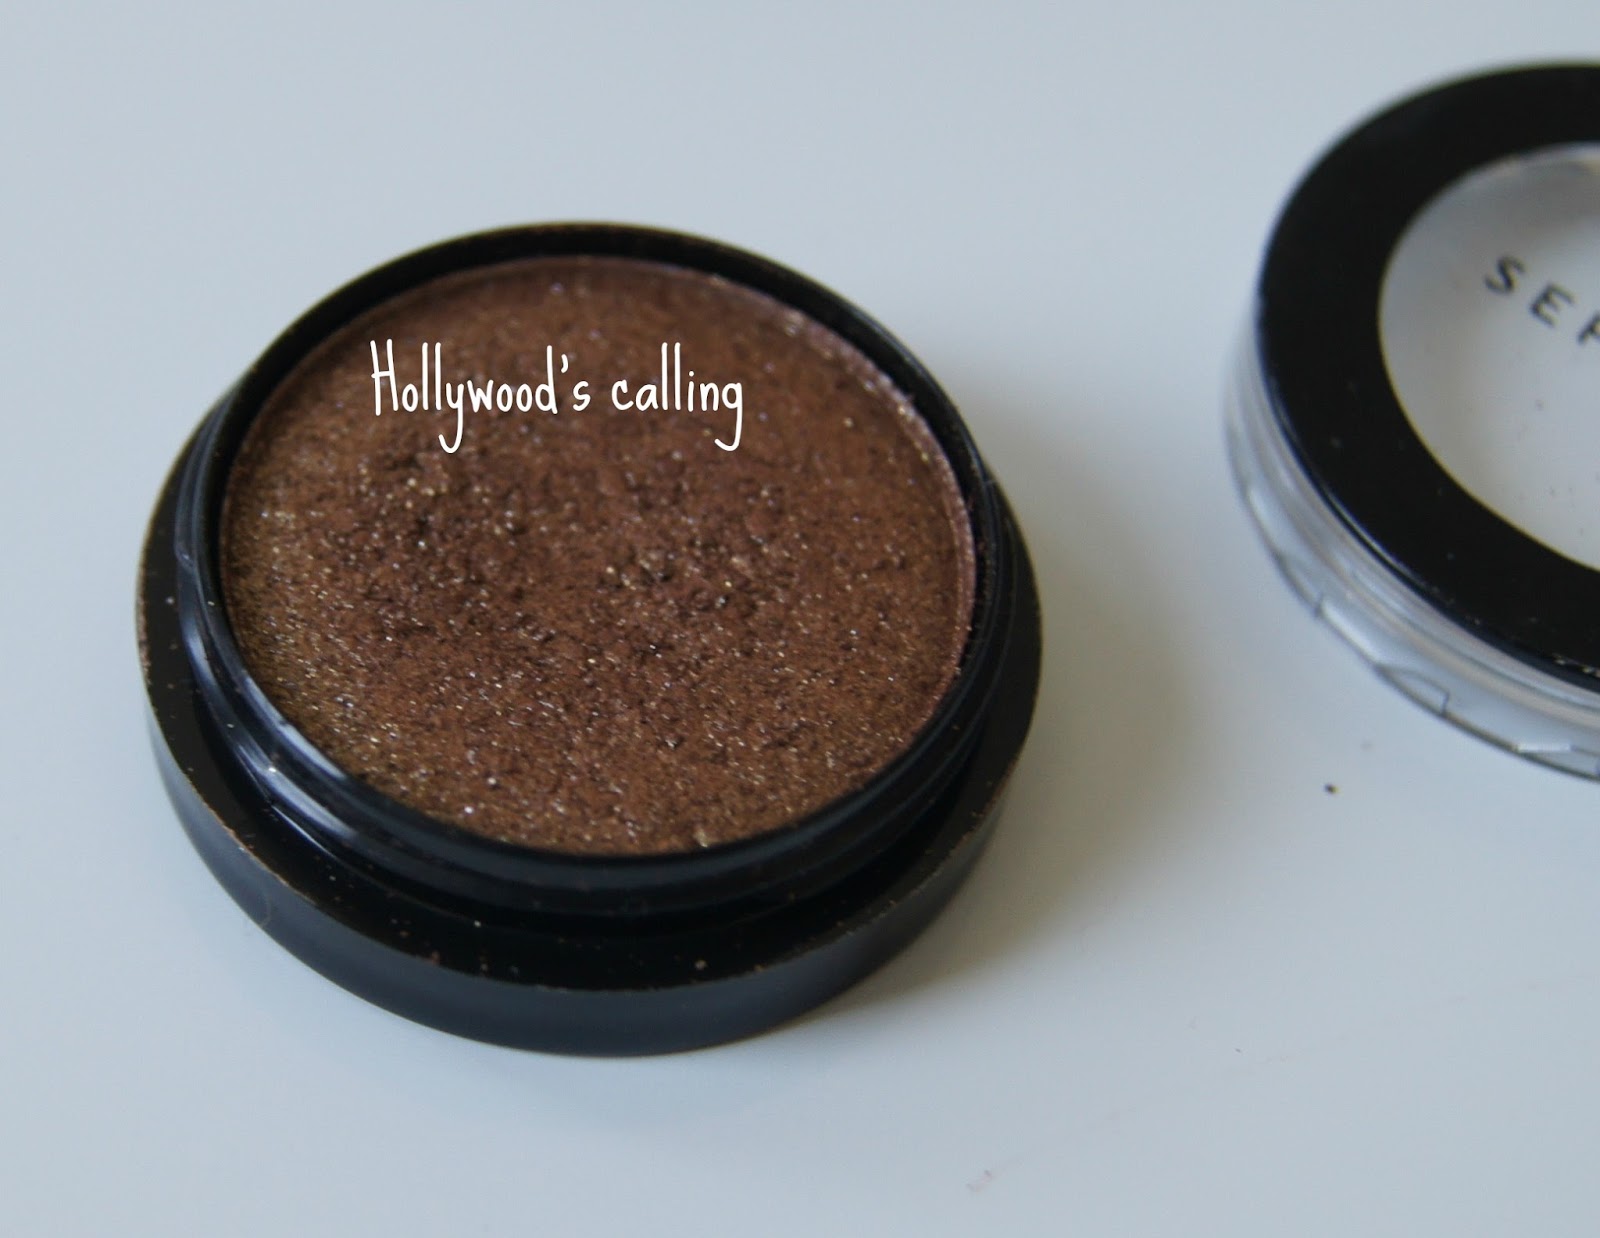 Sephora Colorful eyeshadow review